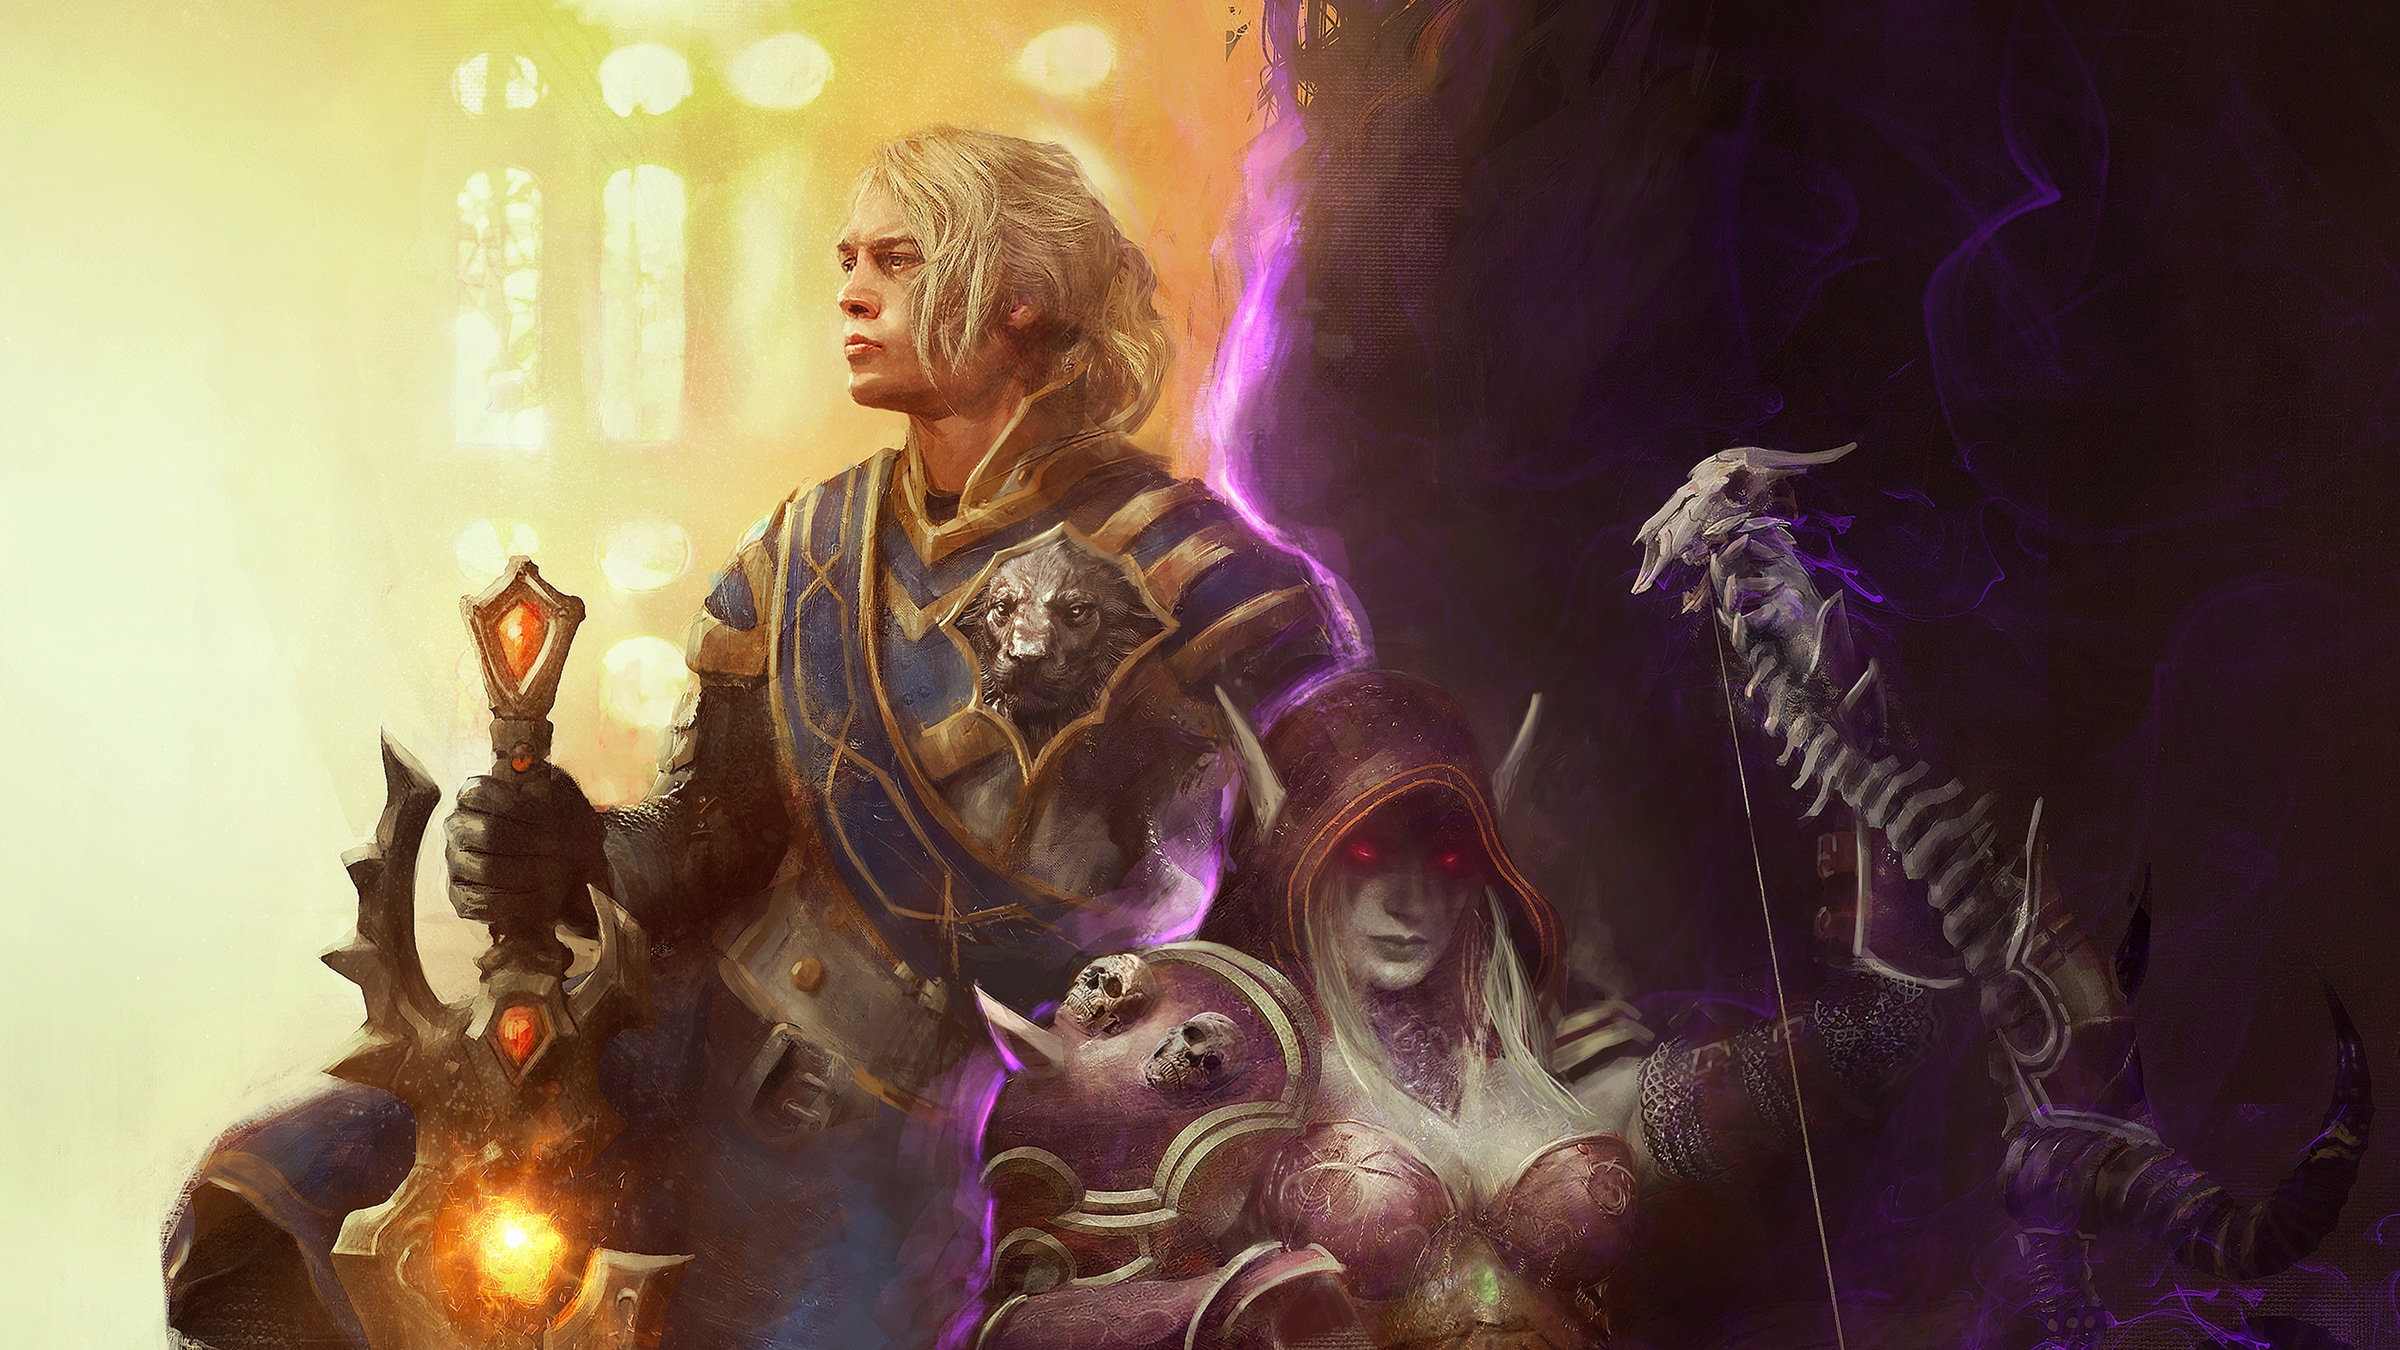 Before the Storm: Seven Ways the Novel Sets the Stage for Battle for Azeroth